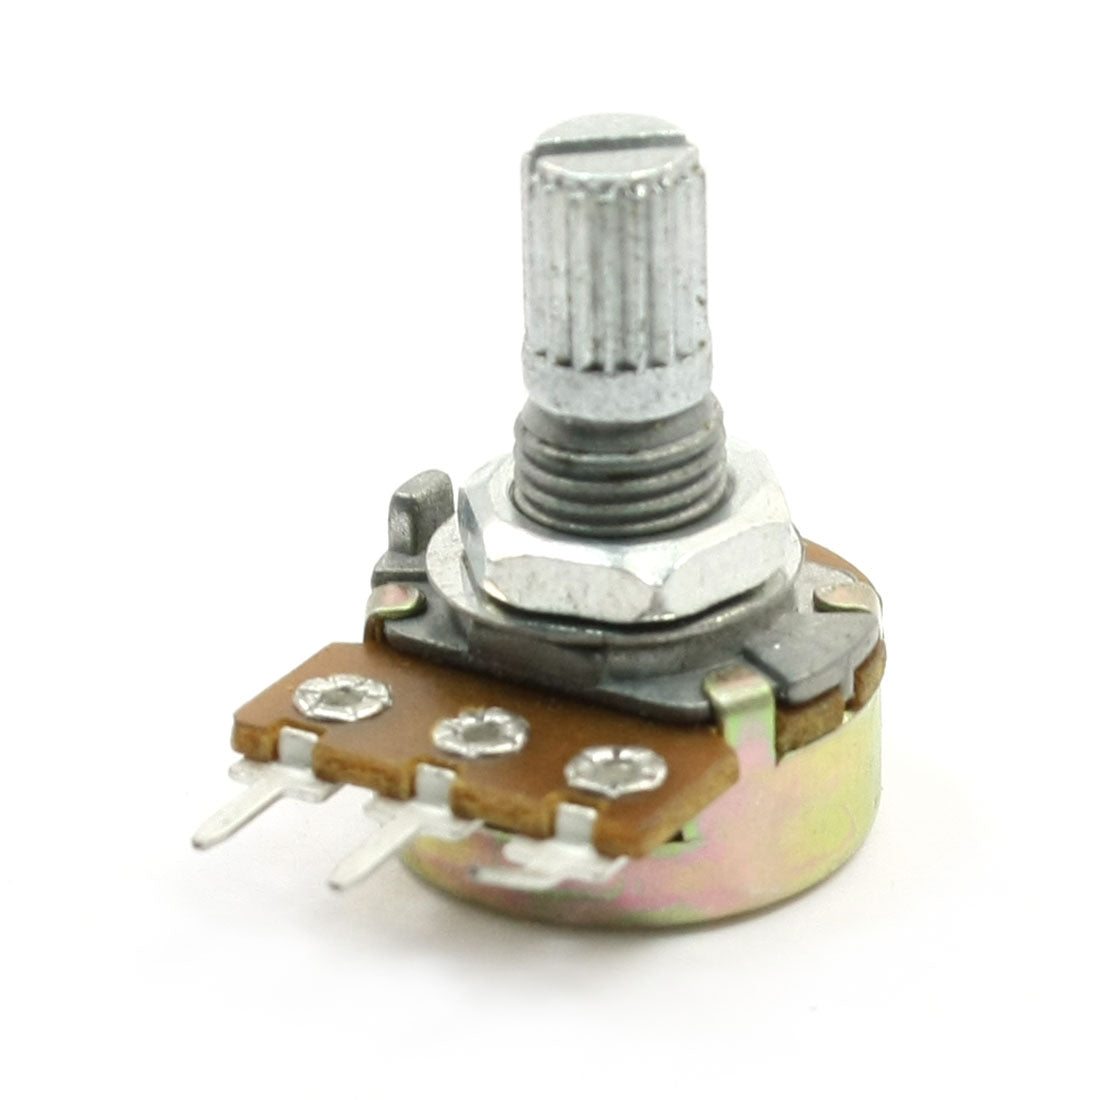 uxcell Uxcell B50K 50K Ohm Adjustment Single Linear Rotary Taper Potentiometer